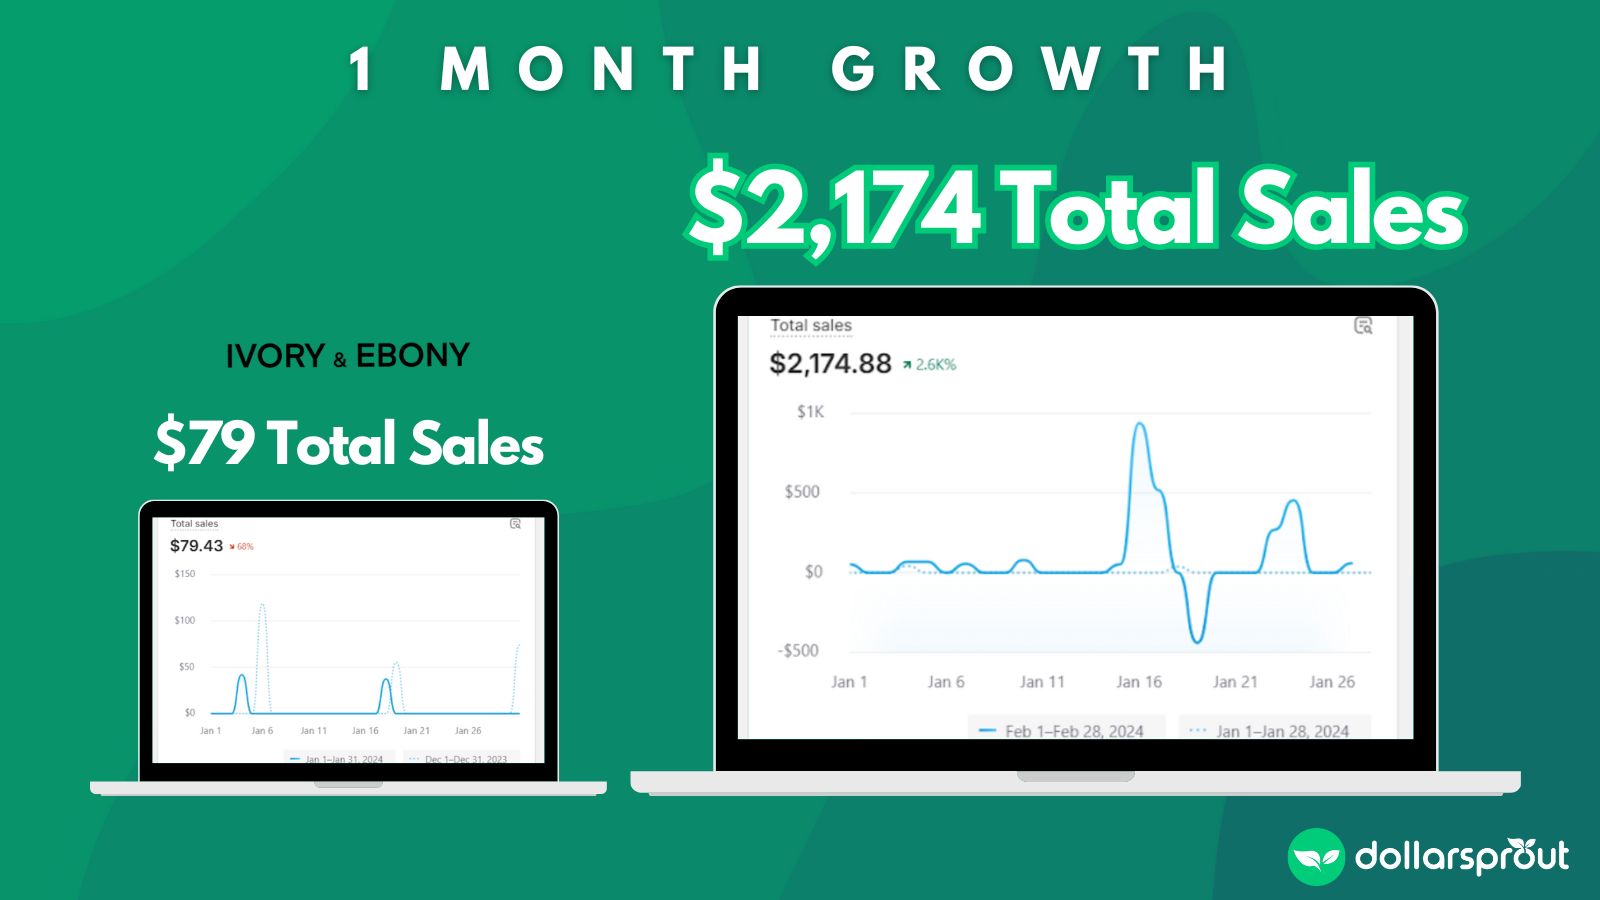 Infographic showing Shopify sales data of $79 in revenue in Jan 2024 and $2,137 revenue in February 2024.